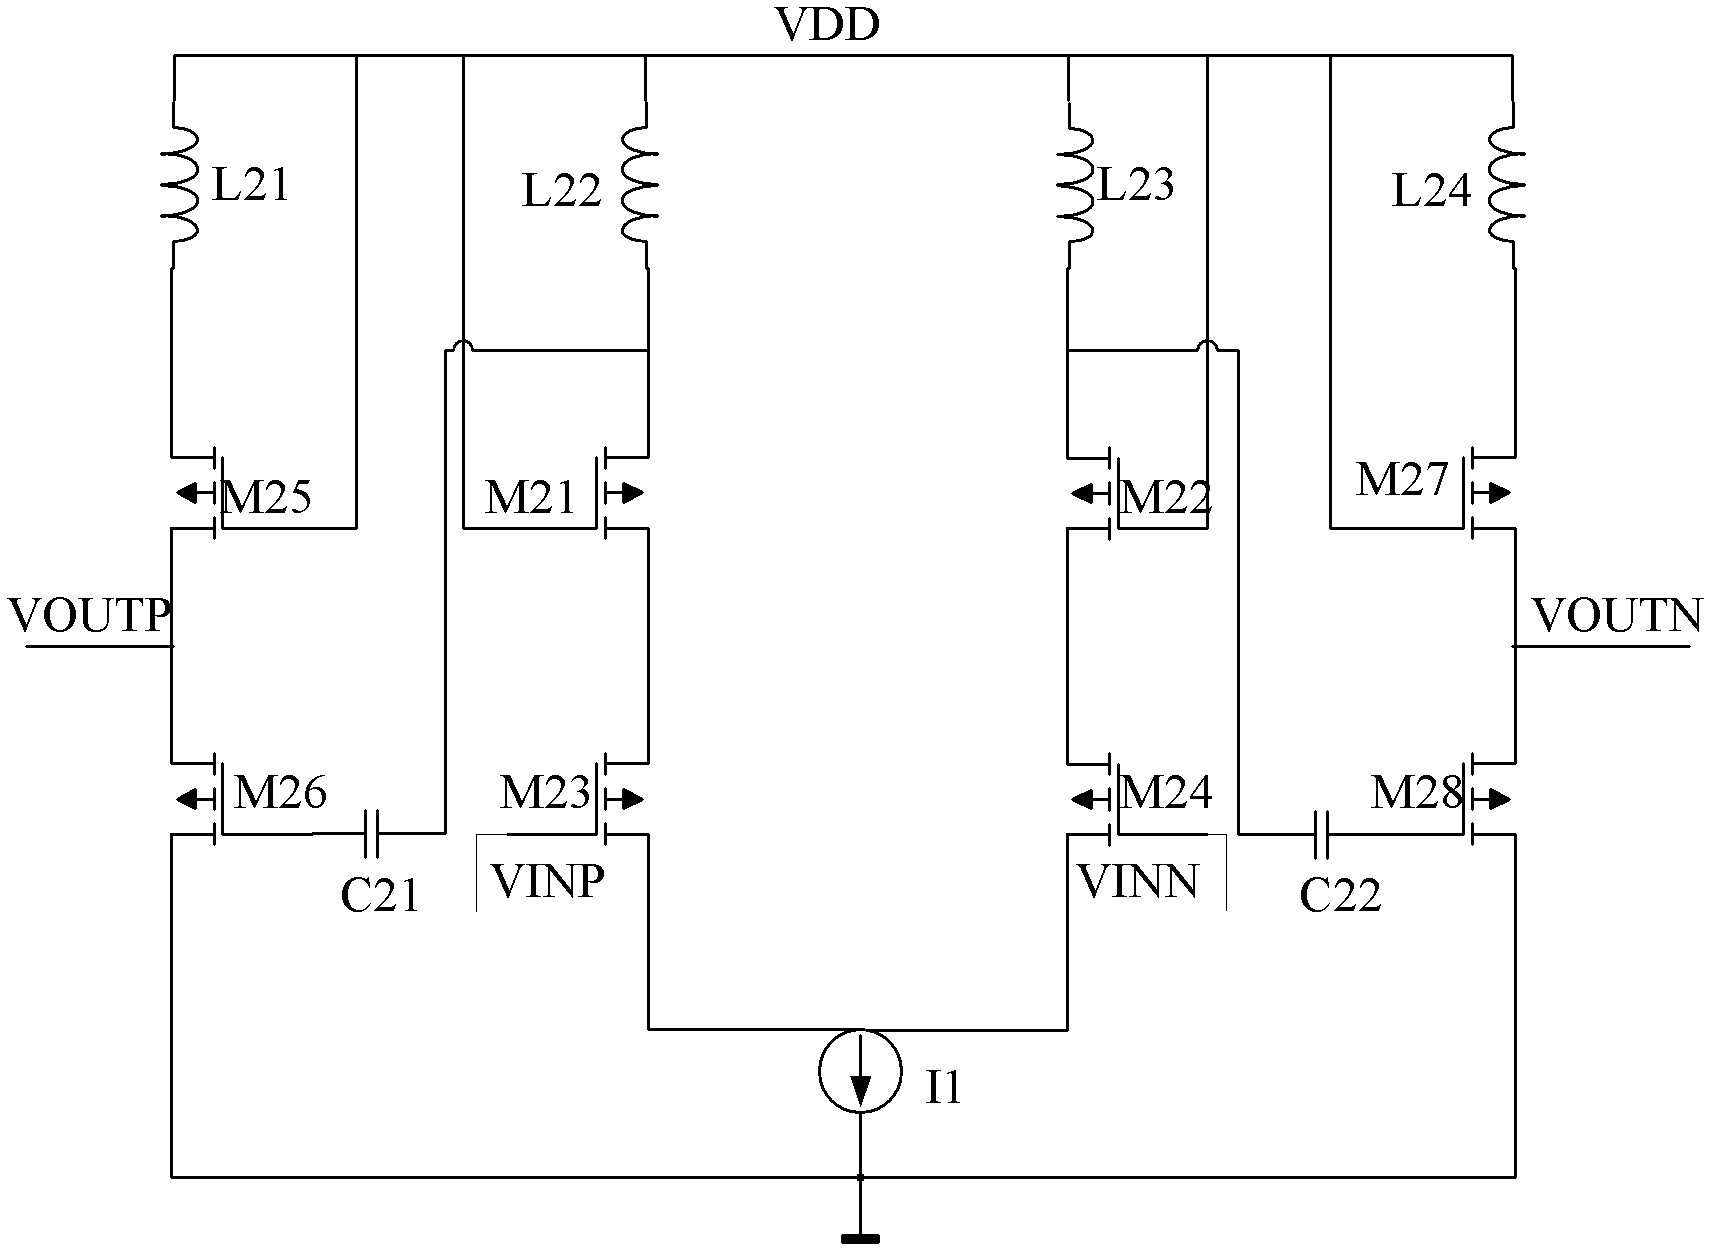 Radio-frequency emission front-end circuit with automatic gain control